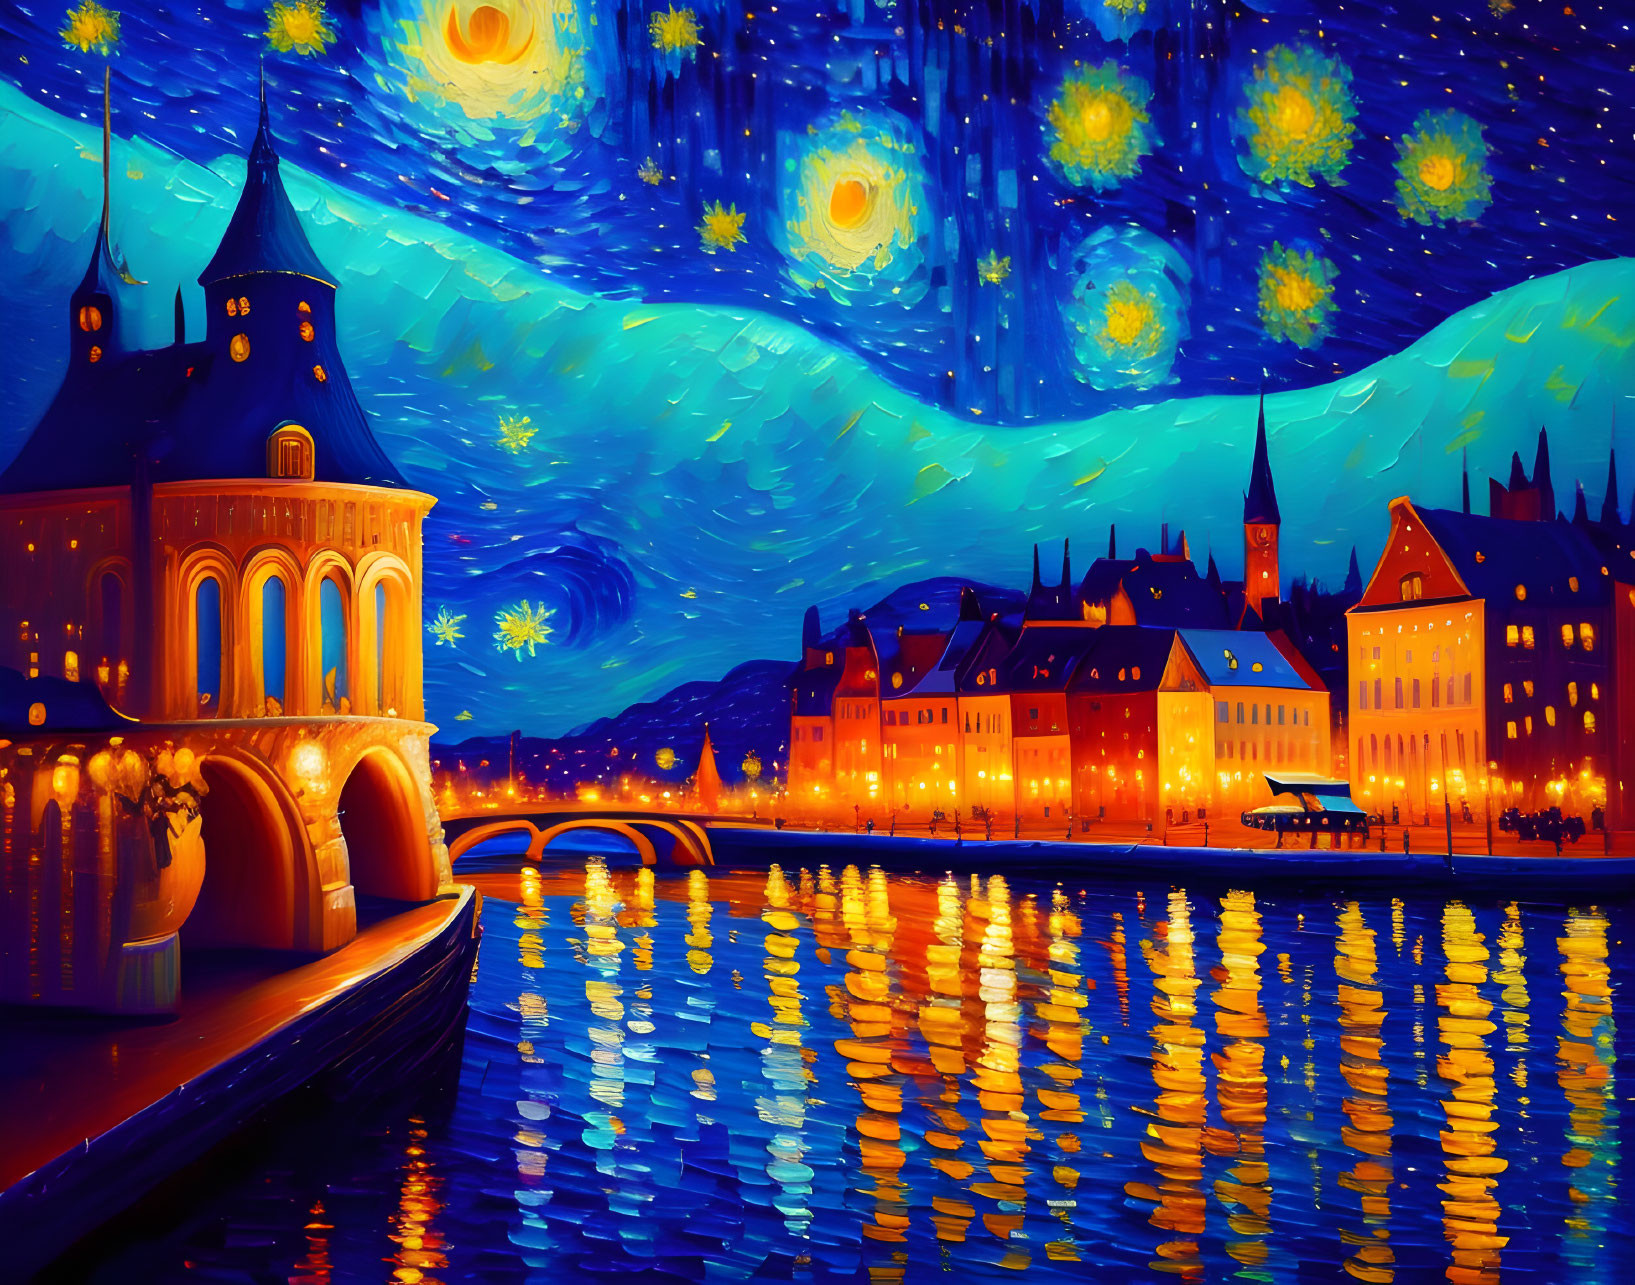 City, starry night Oil painting, dreamy, painterly